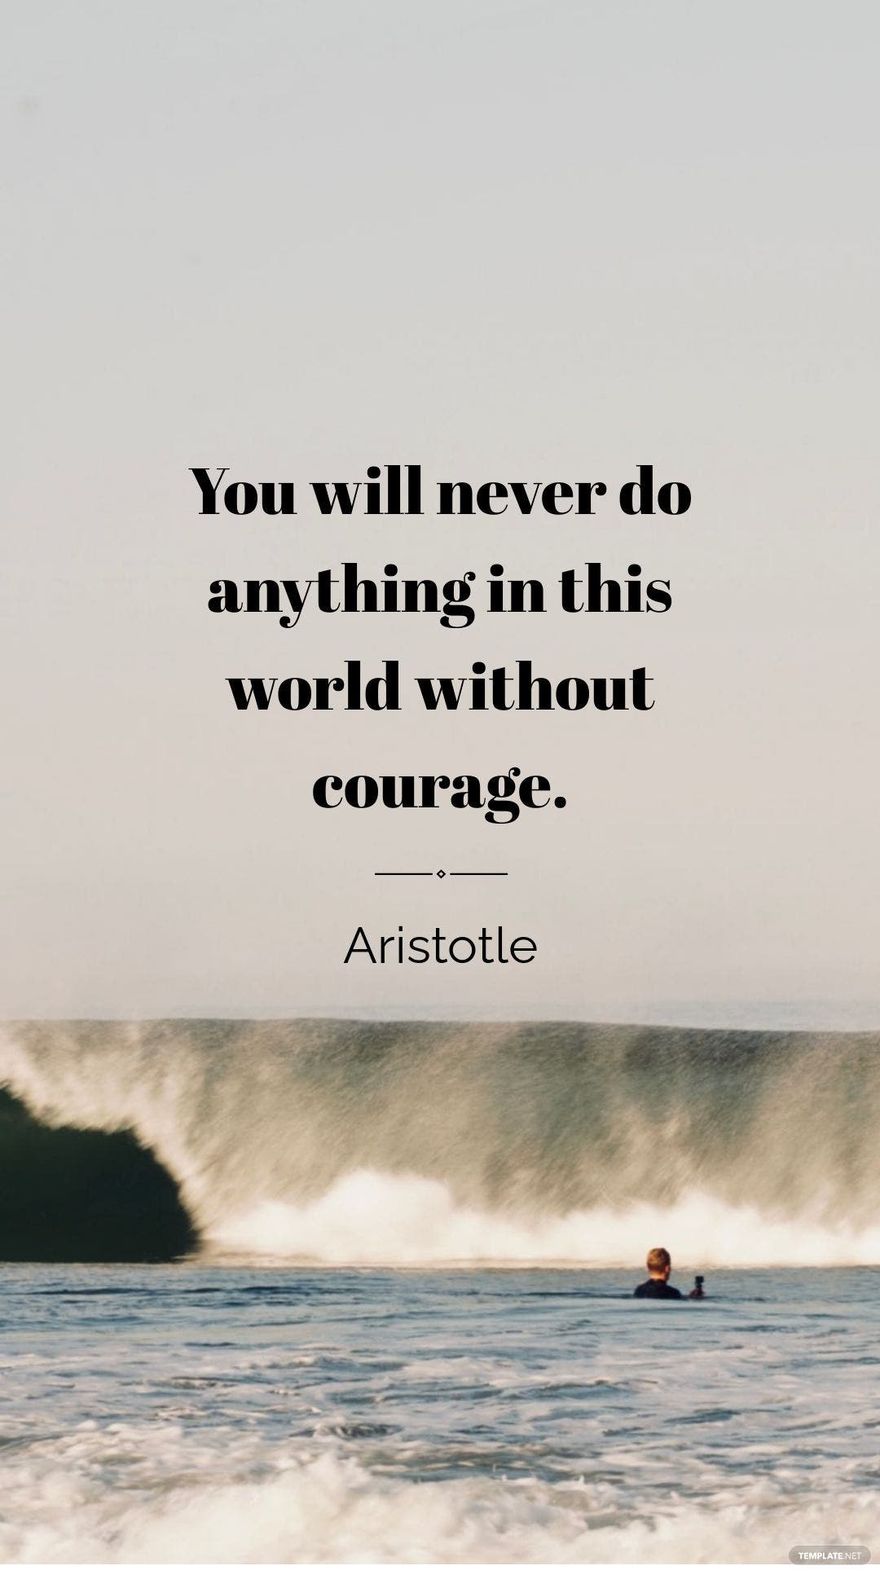 Aristotle - You will never do anything in this world without courage.